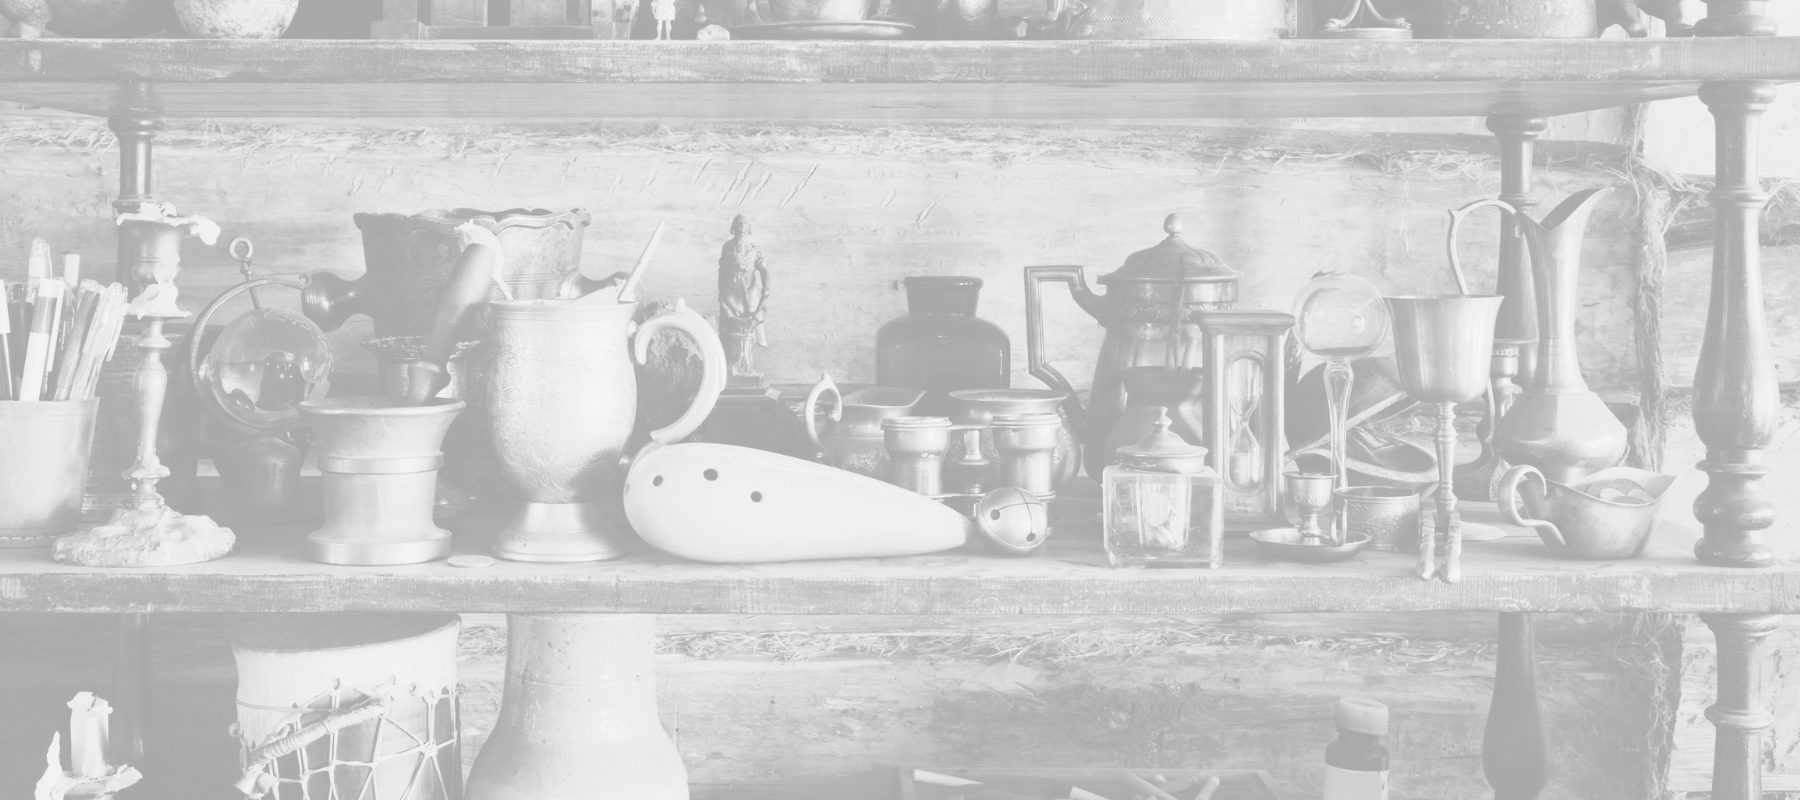 Many sentimental items appear on a shelf, including pitchers, vases, teacups, an ocarina, and art supplies